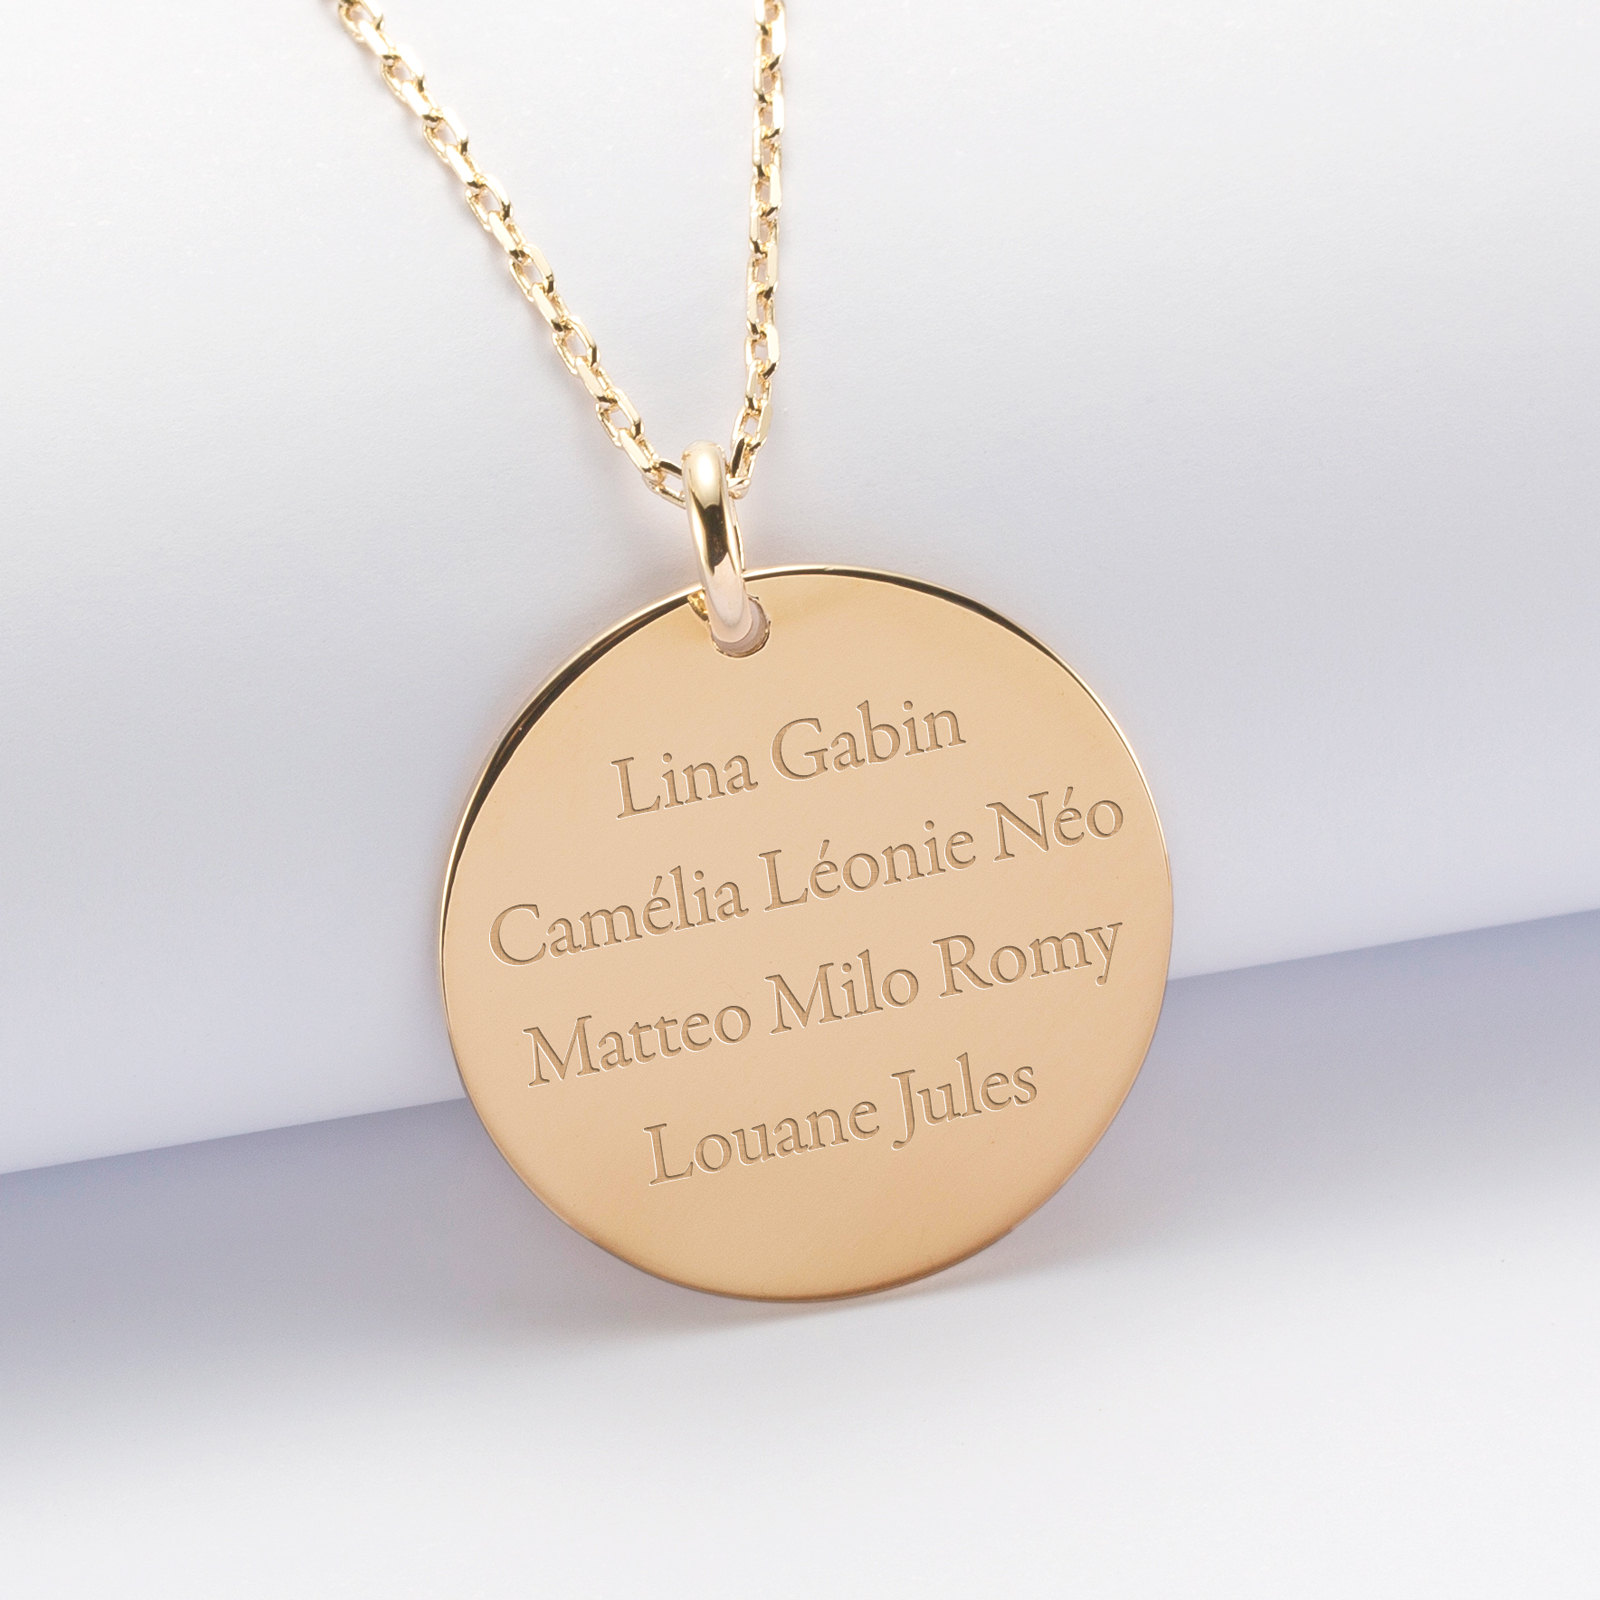 Personalised engraved gold-plated 27 mm medallion pendant Grandma special edition - names 1